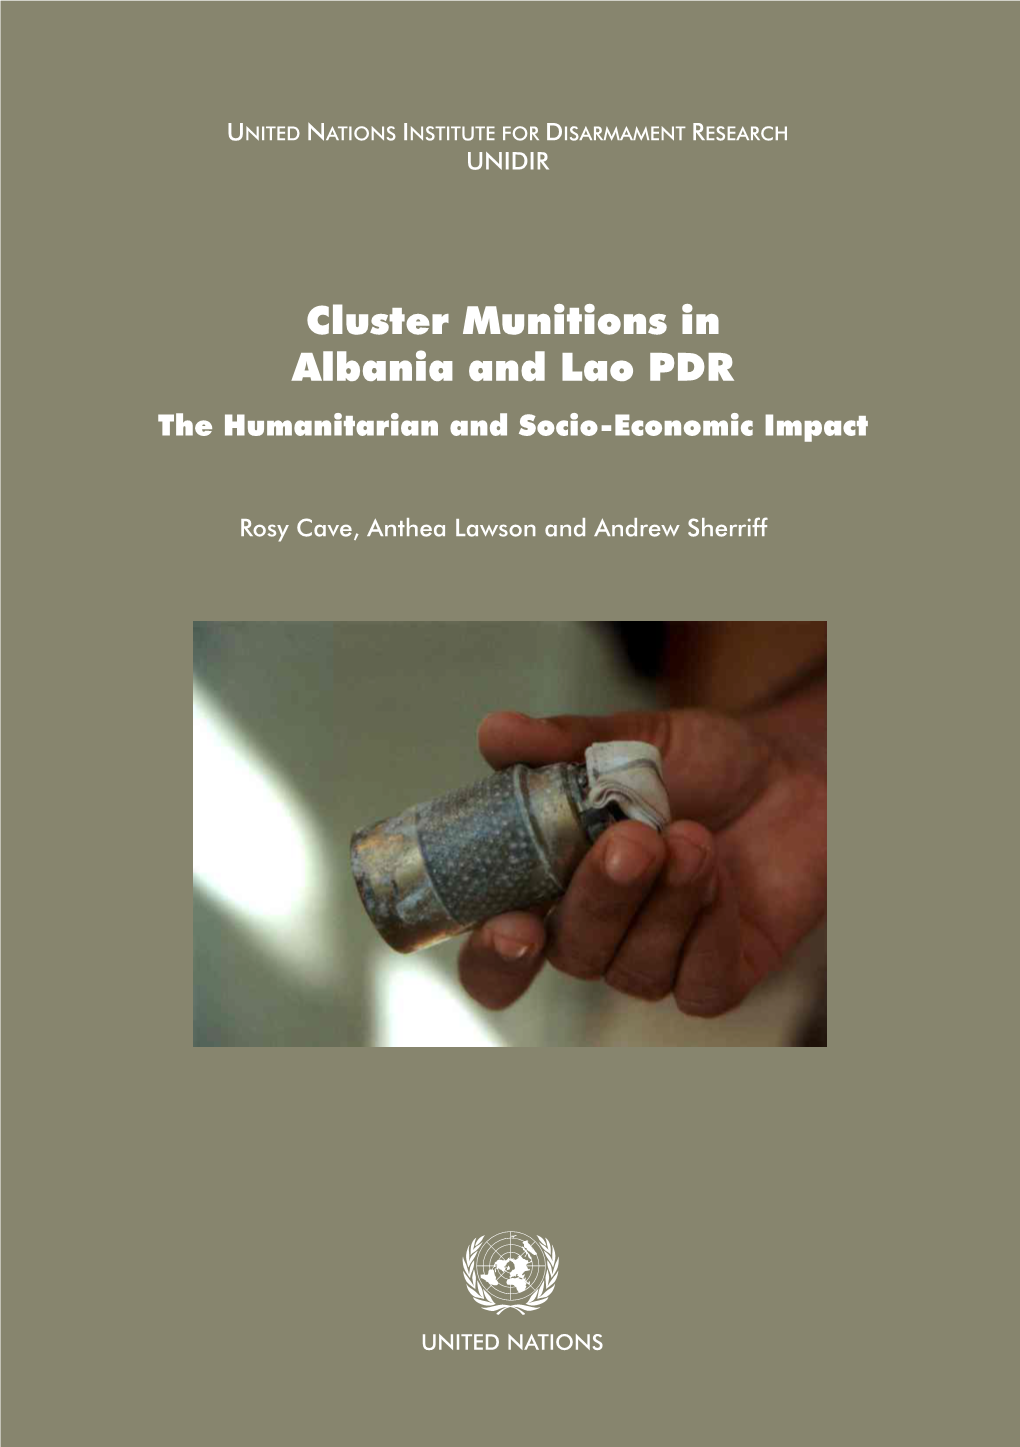 Cluster Munitions in Albania and Lao PDR